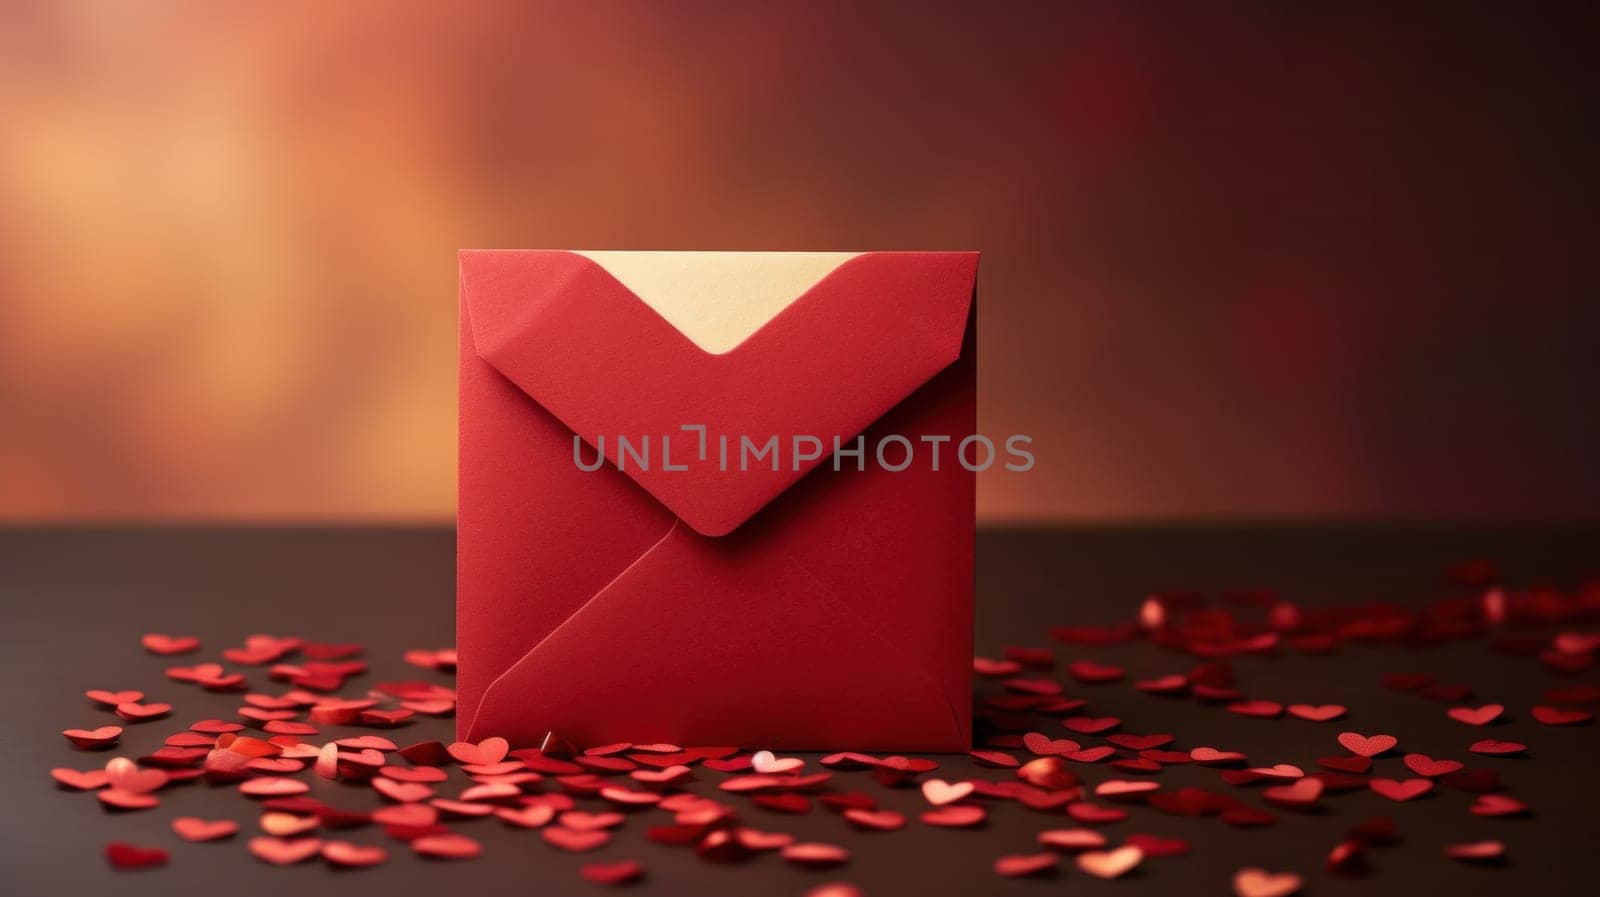 A red envelope with a heart shape on top of it